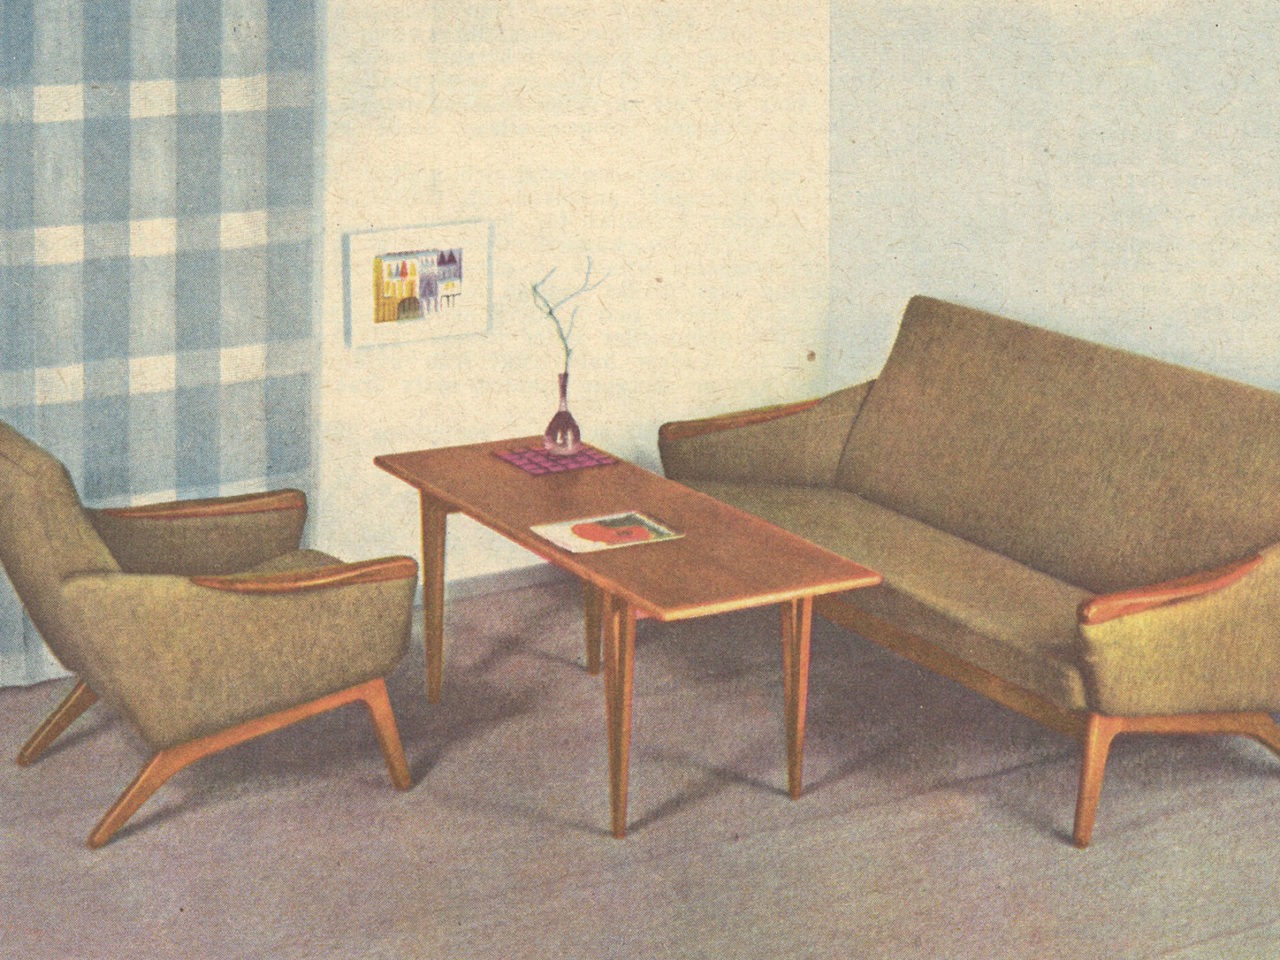 A coffee table surrounded by an armchair and sofa, model SORÖ, in functional style. Table and seating details in brown wood.